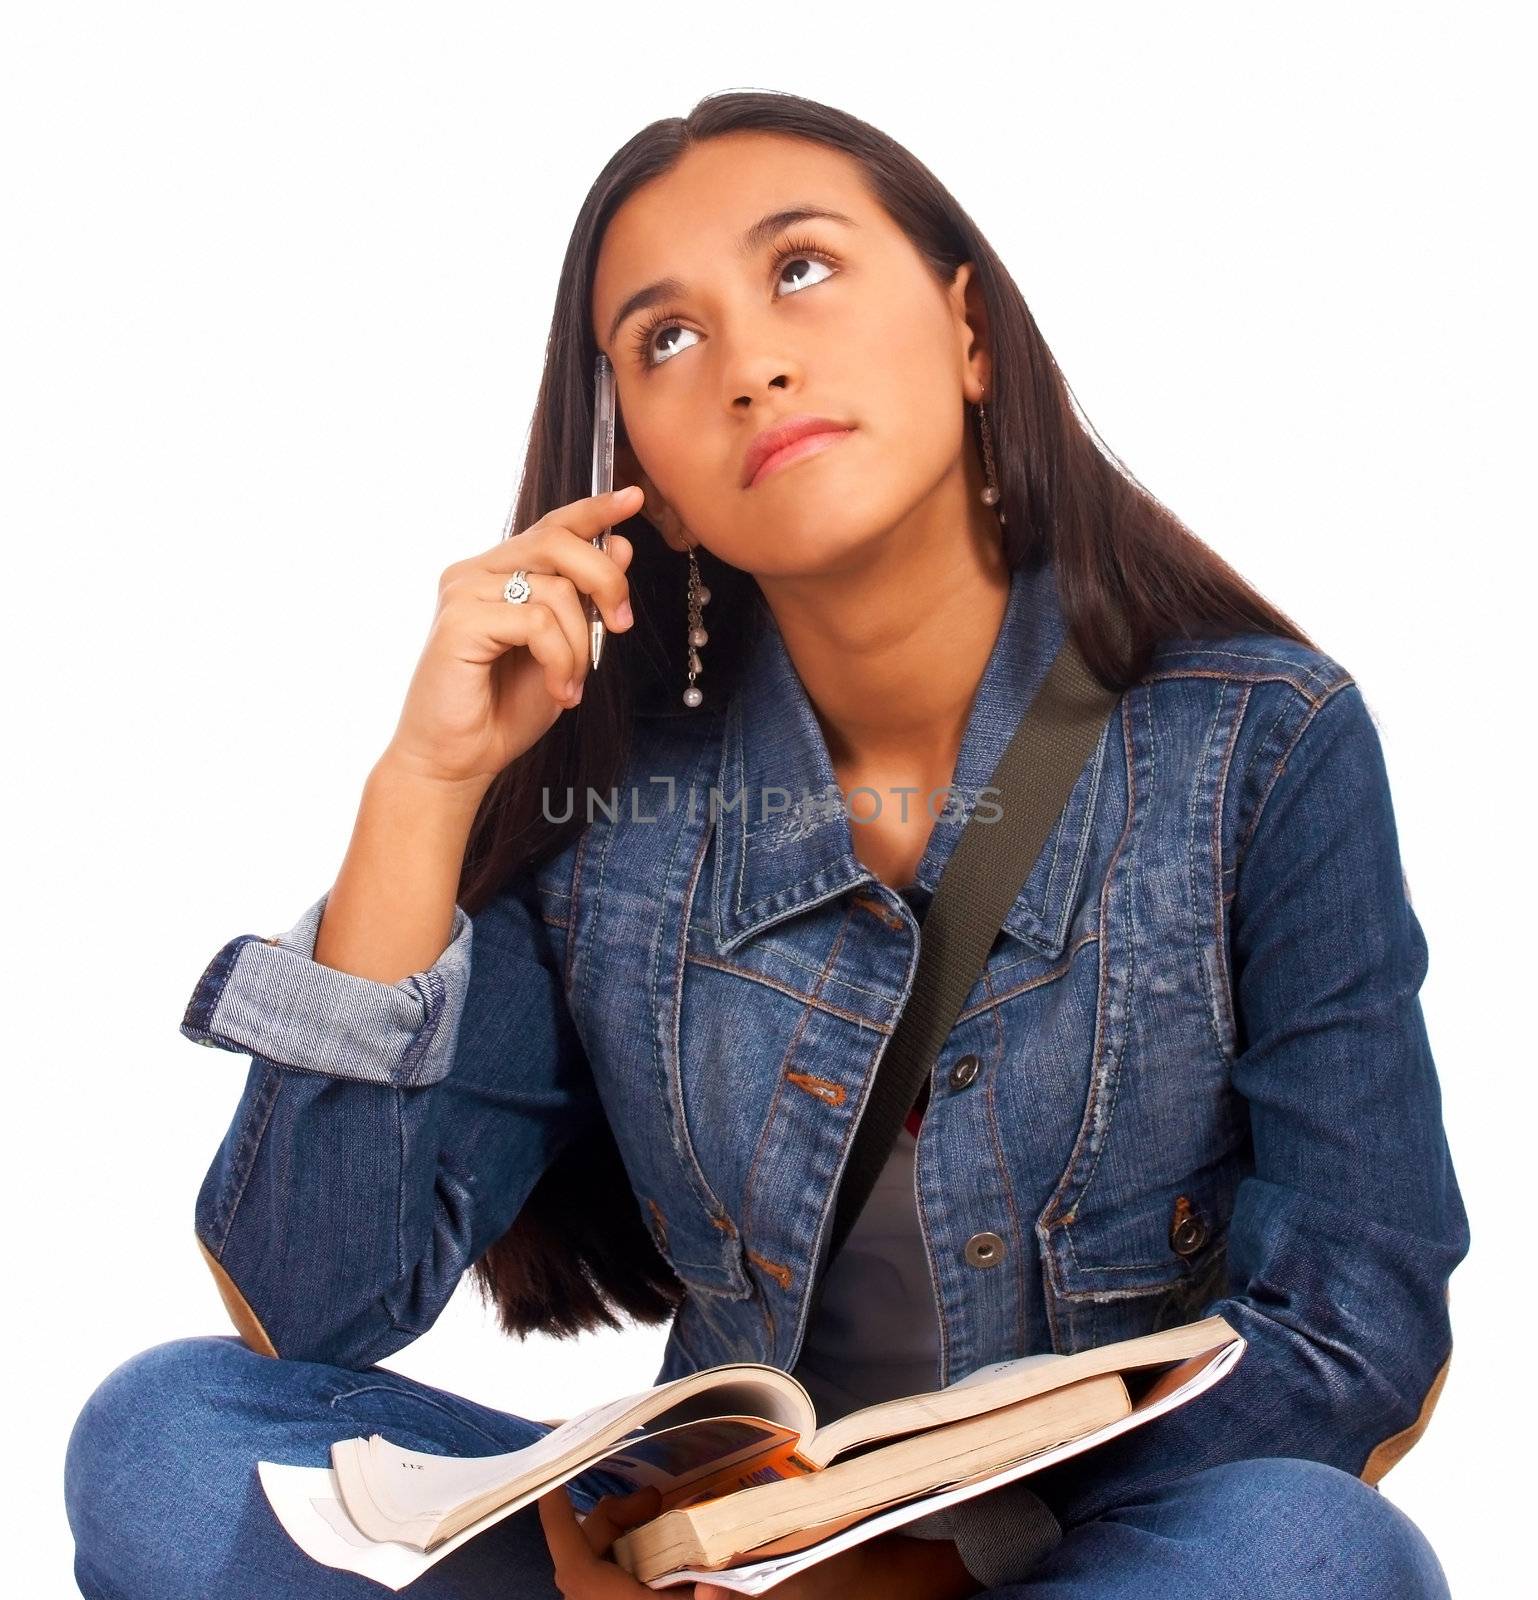 Young Student Holding Books And Looking In The Air Thinking About Her Studies